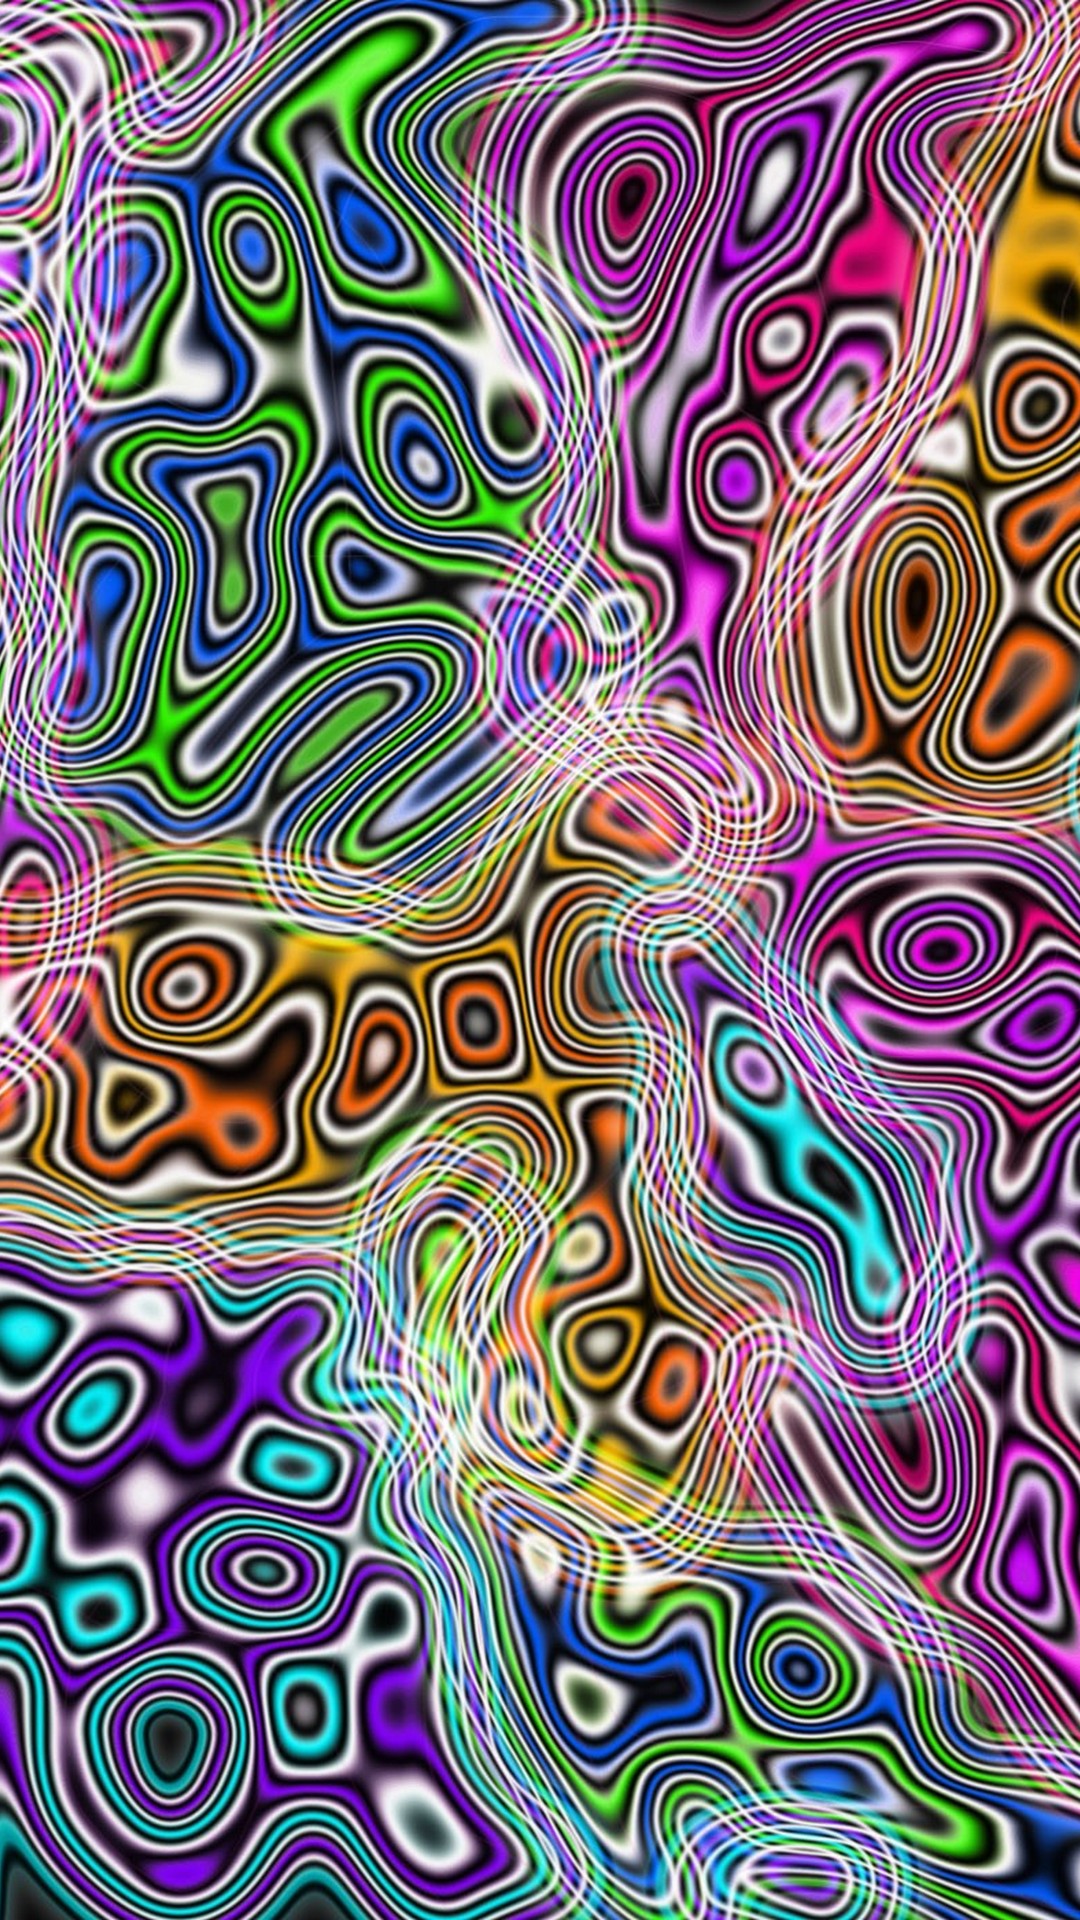 Trippy Art Wallpaper For Android with HD resolution 1080x1920